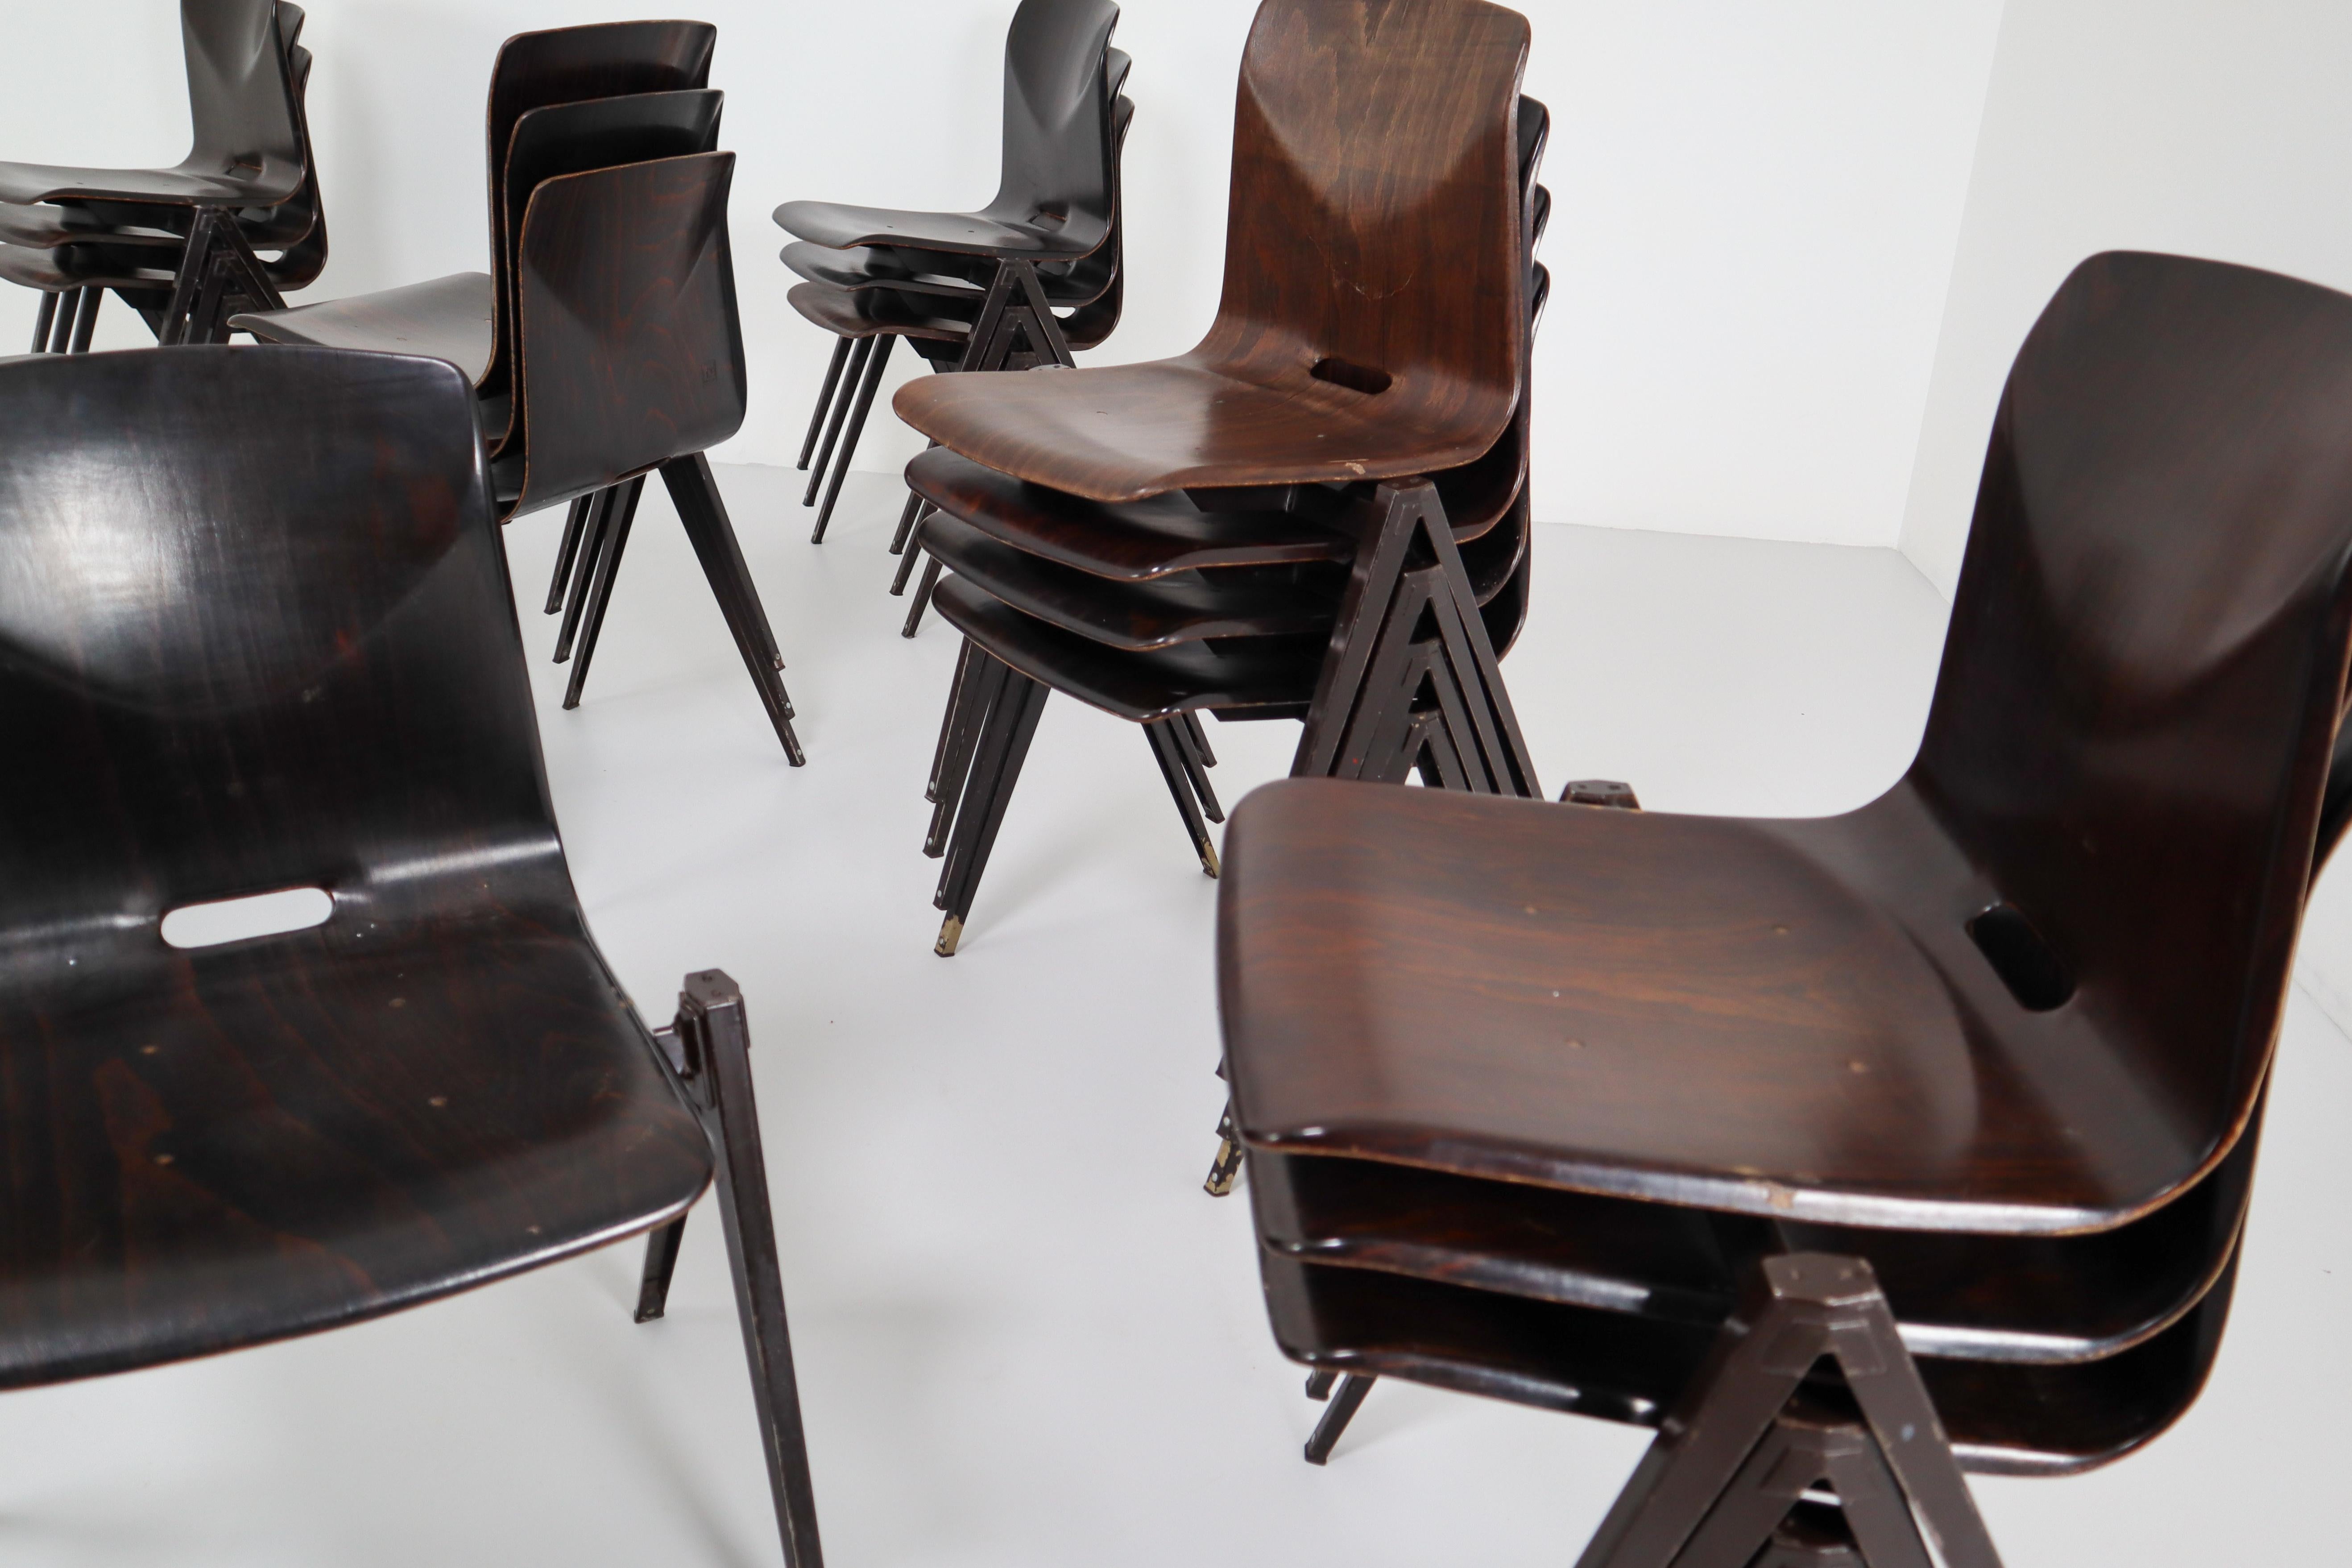 Set of 30 vintage industrial stackable Galvanitas S22 plywood V-leg chair. Black folded and welded steel bases with dark ebony plywood Thur on seat good condition. Slight traces of use.